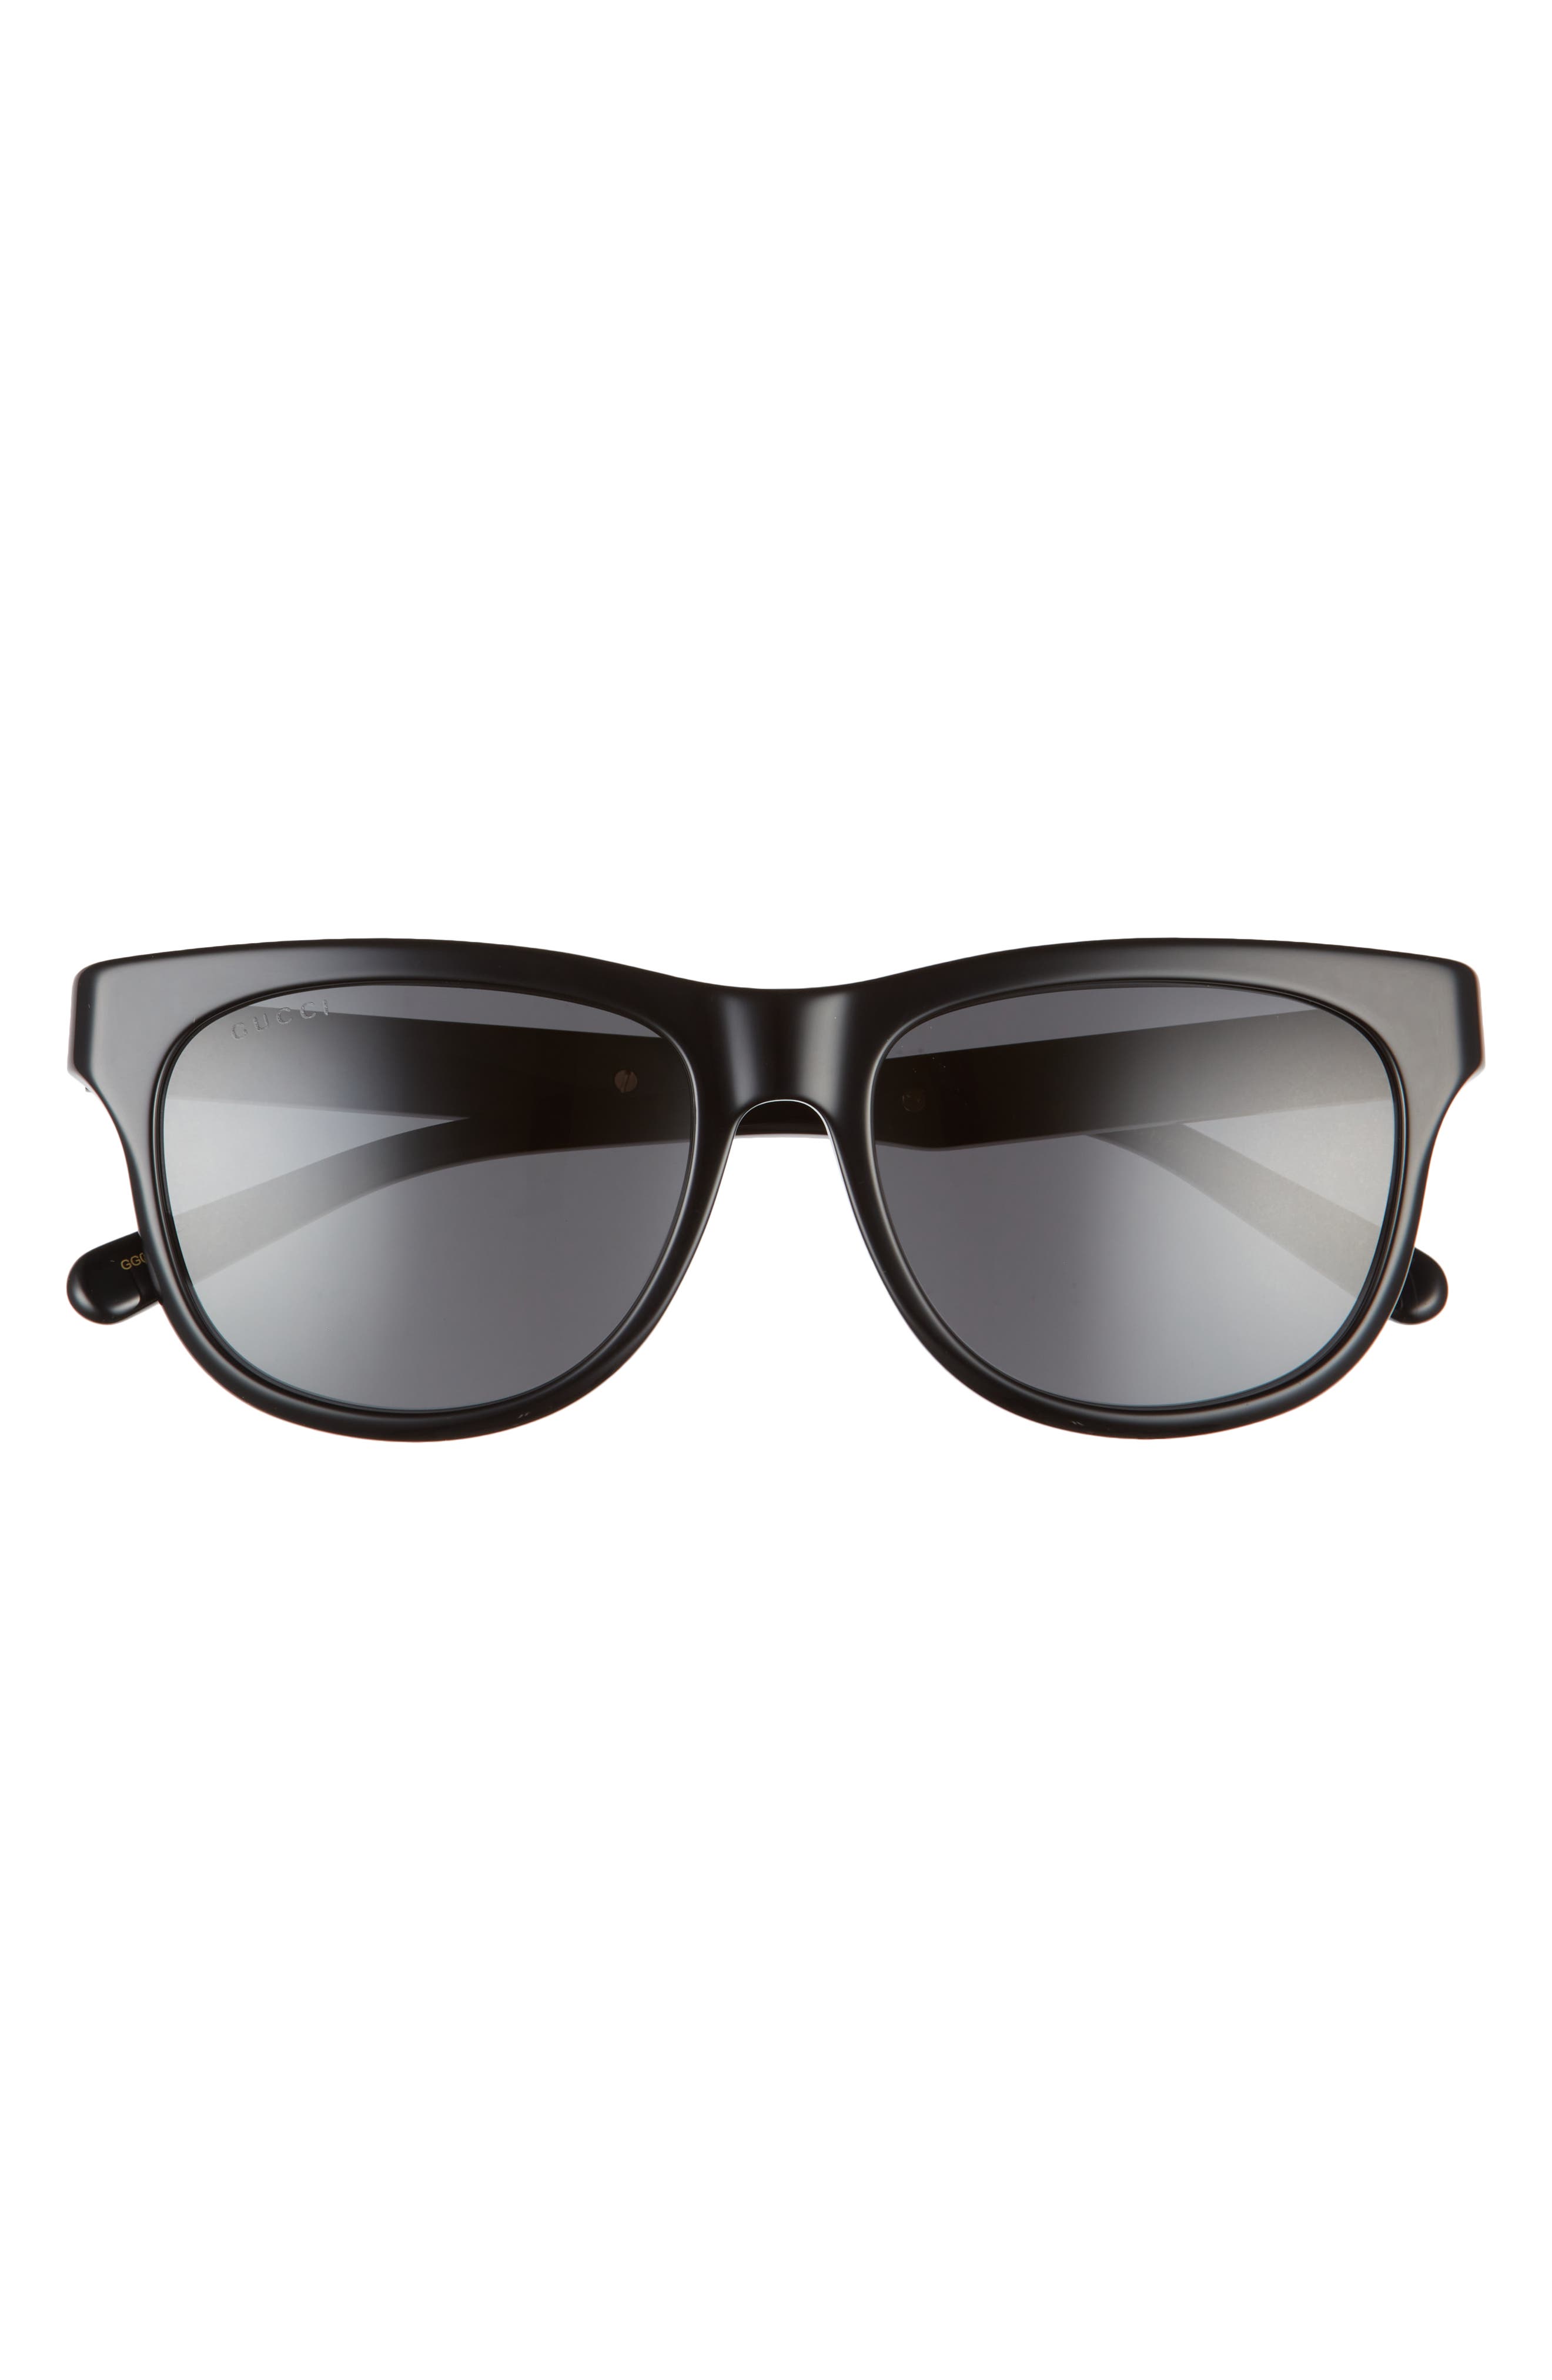 Gucci 55mm Square Sunglasses in Black/Grey at Nordstrom